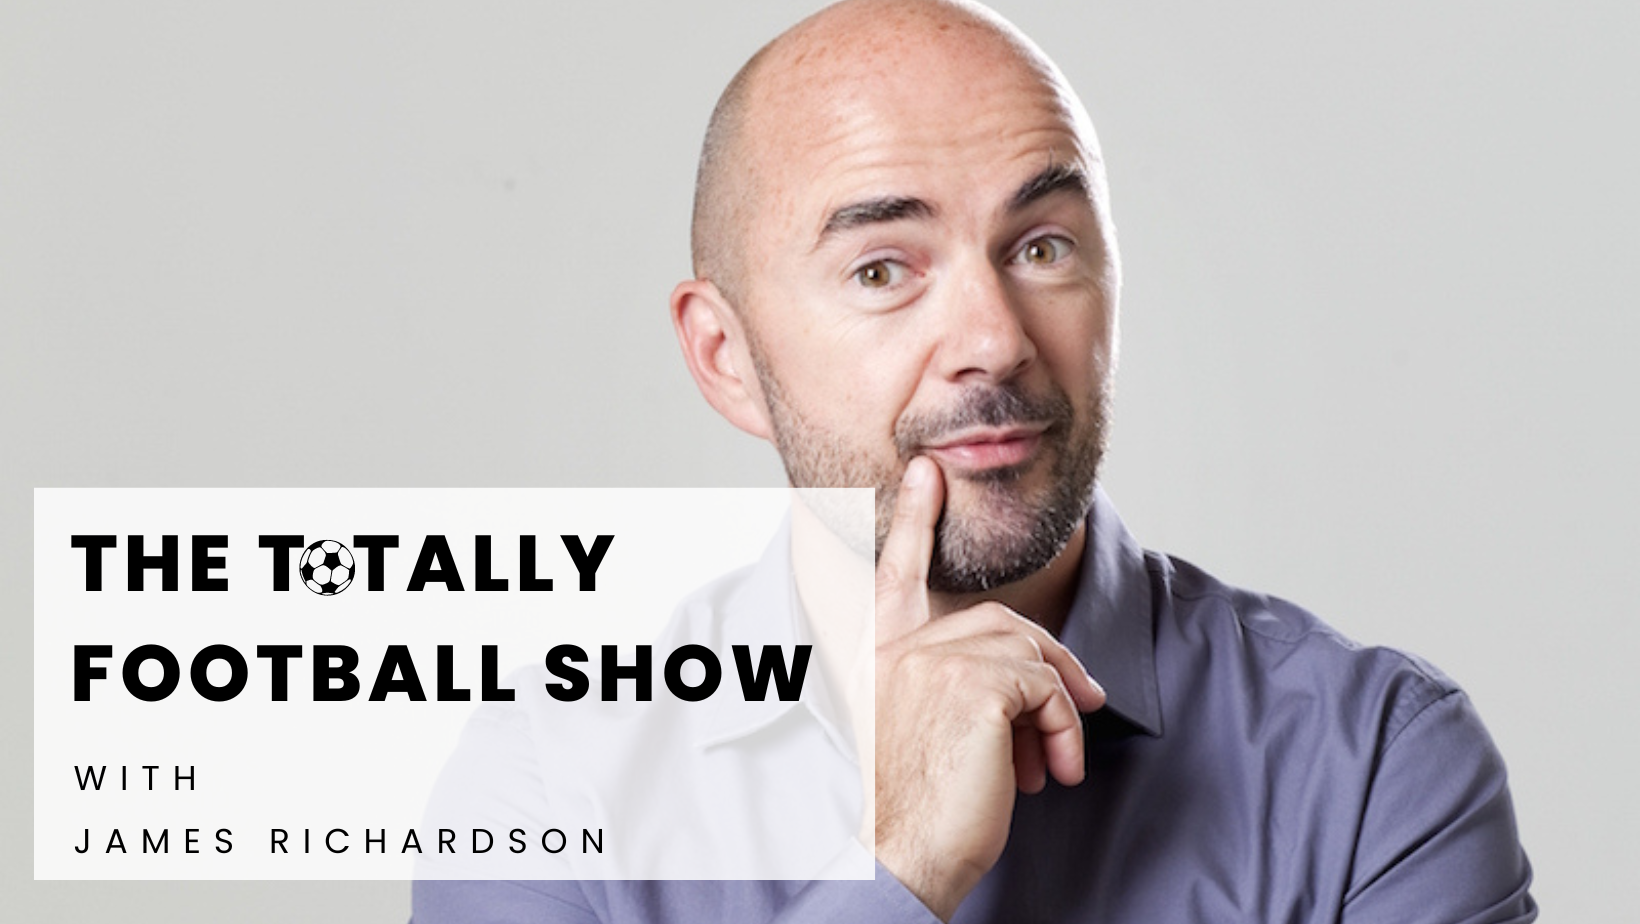 The Totally Football Show Review